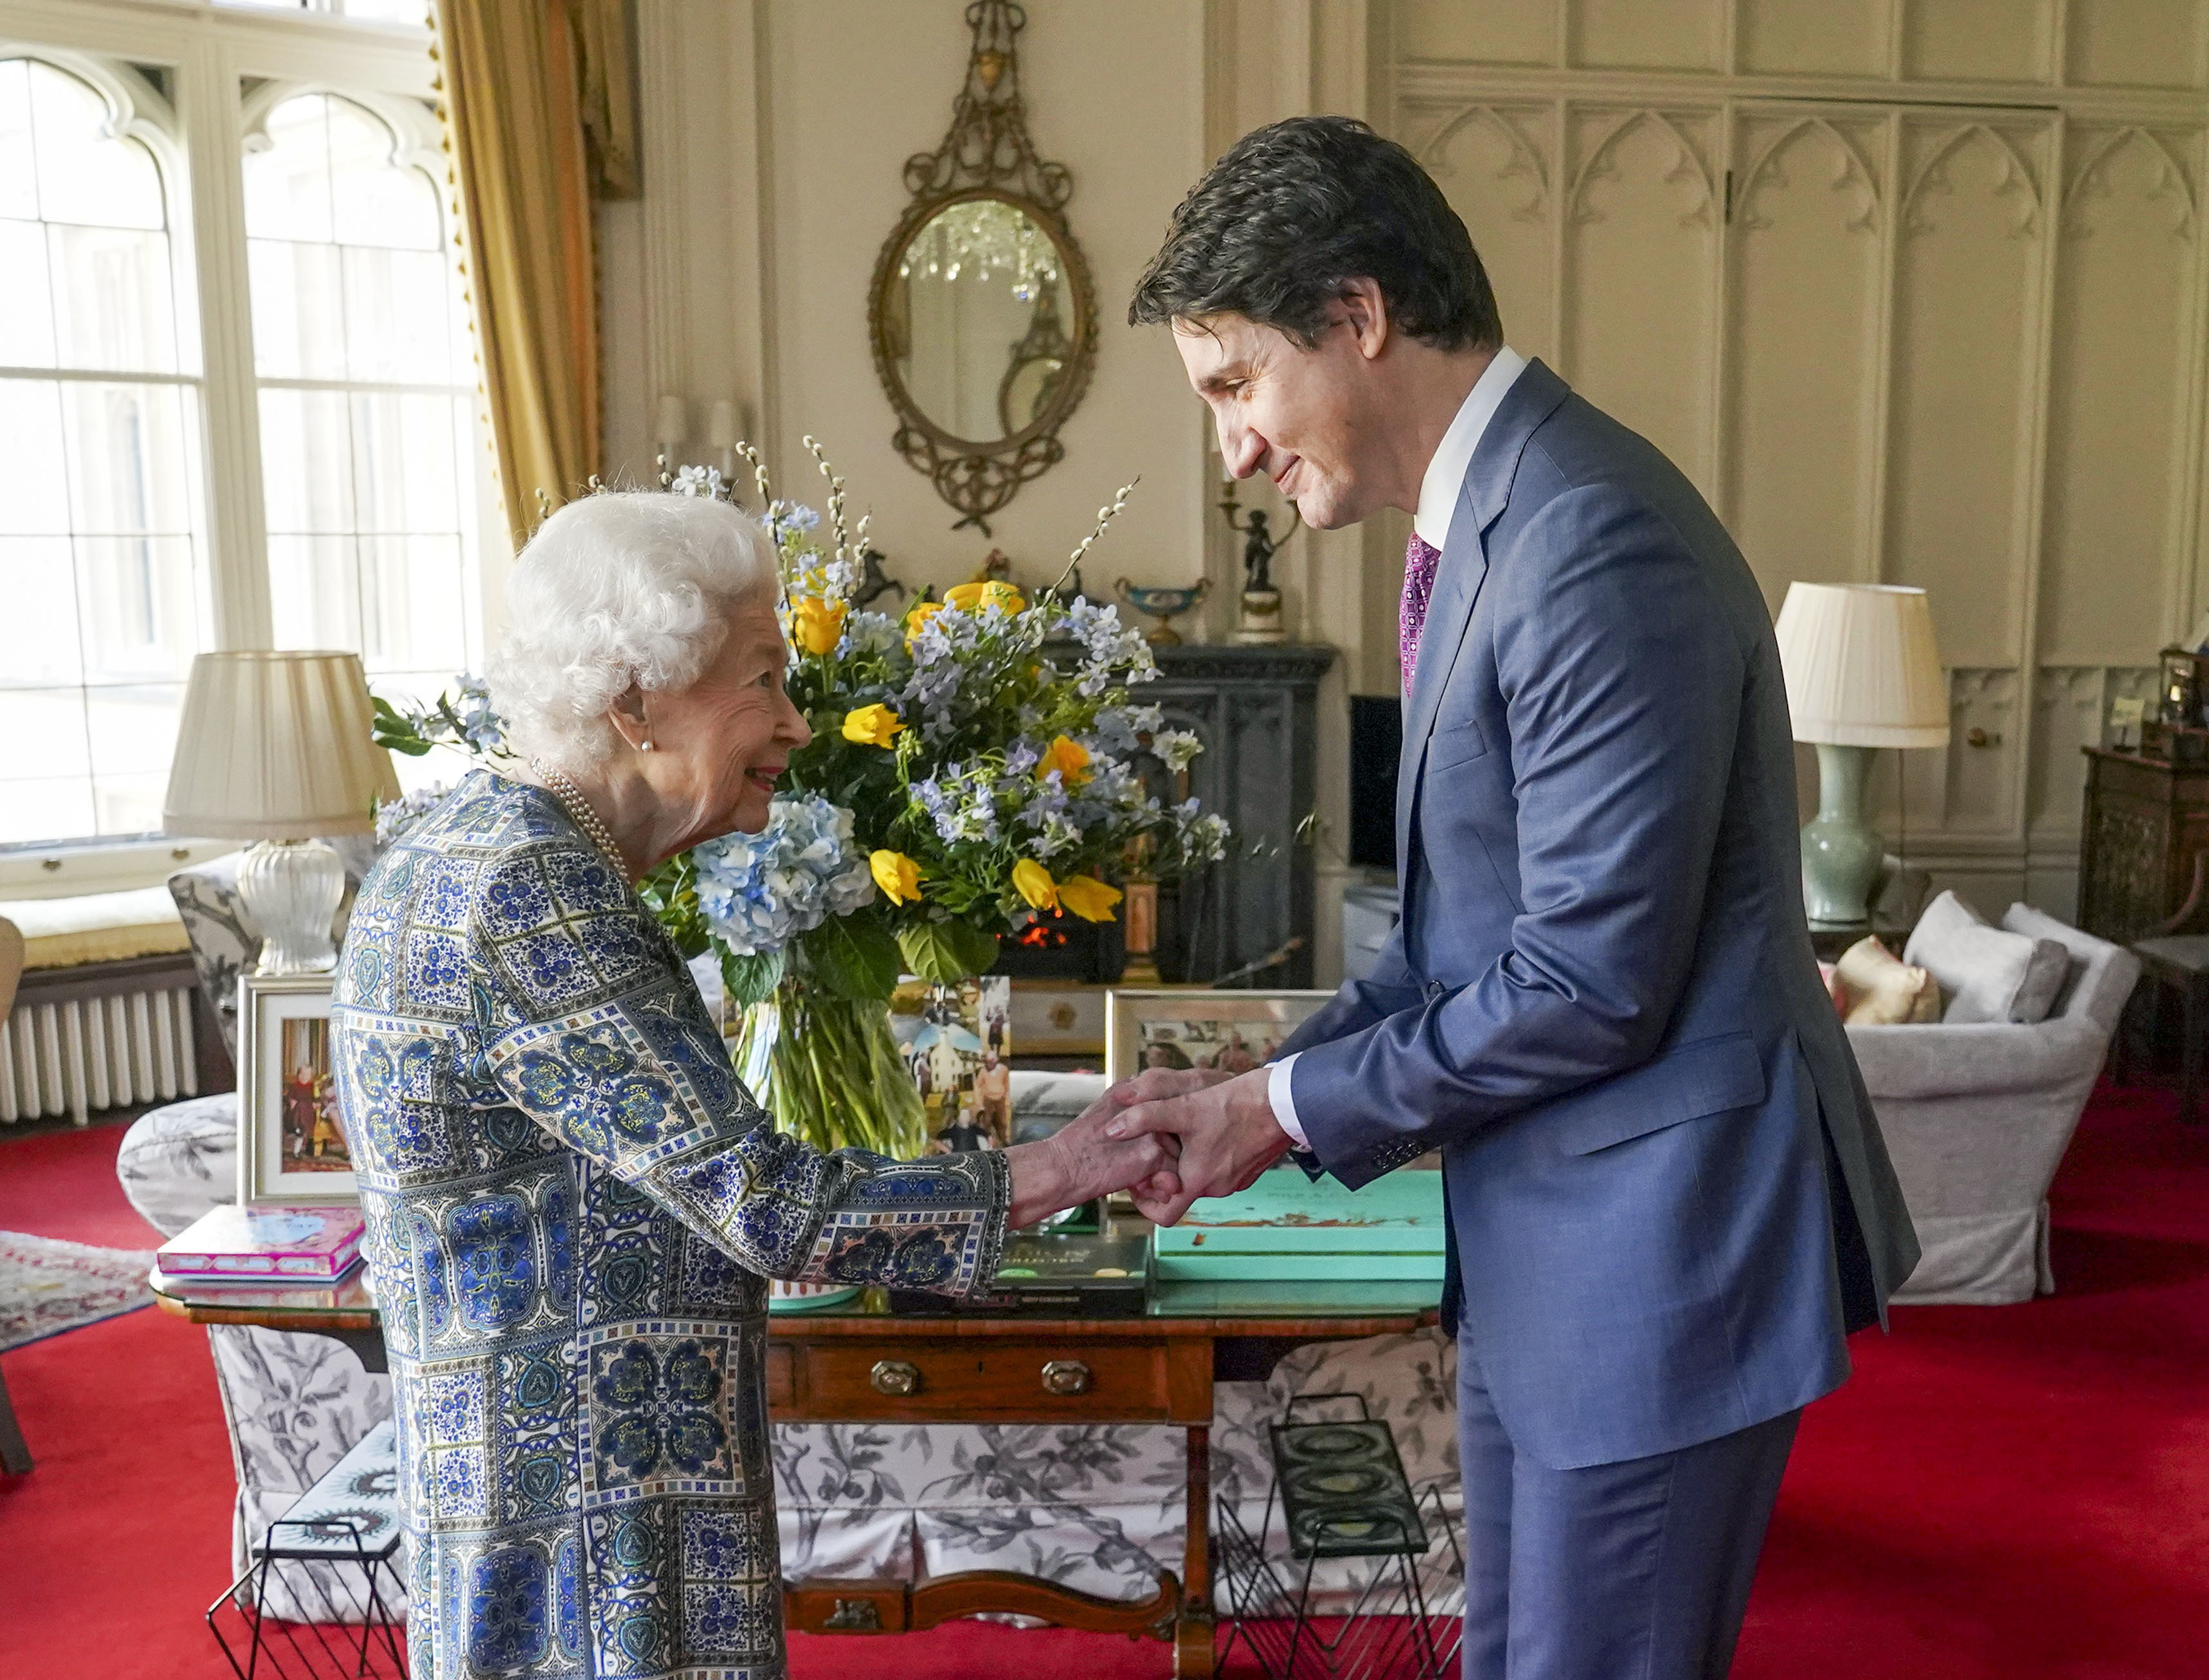 The Queen and Justin Trudeau